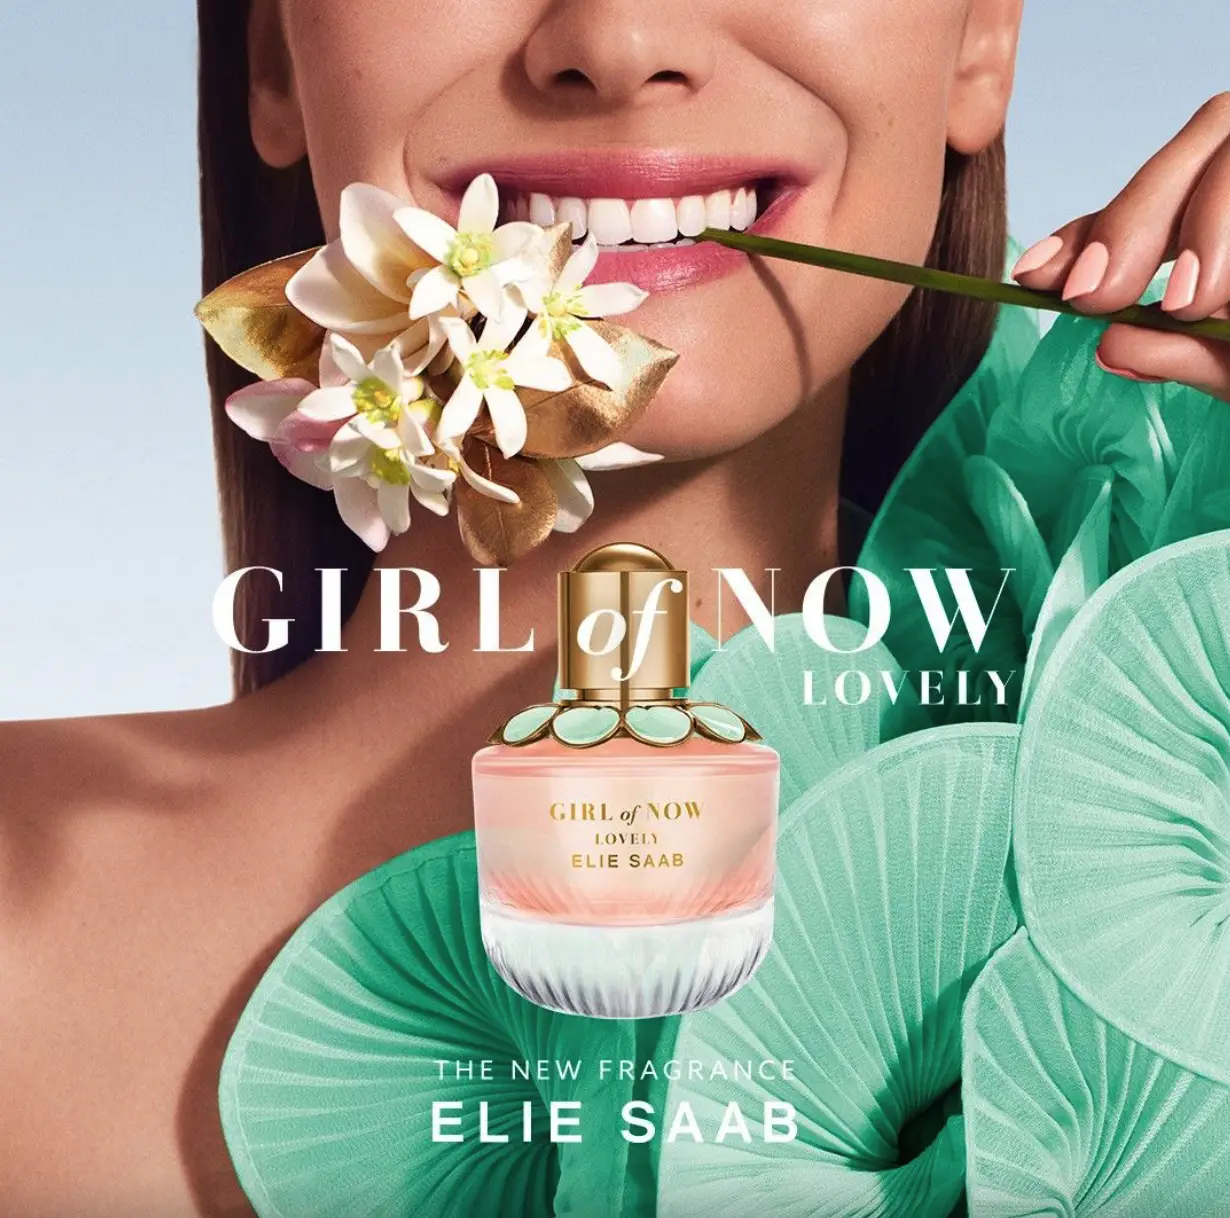 Elie Saab Girl-Of-Now-Lovely
Best Perfumes For Teenage Girls